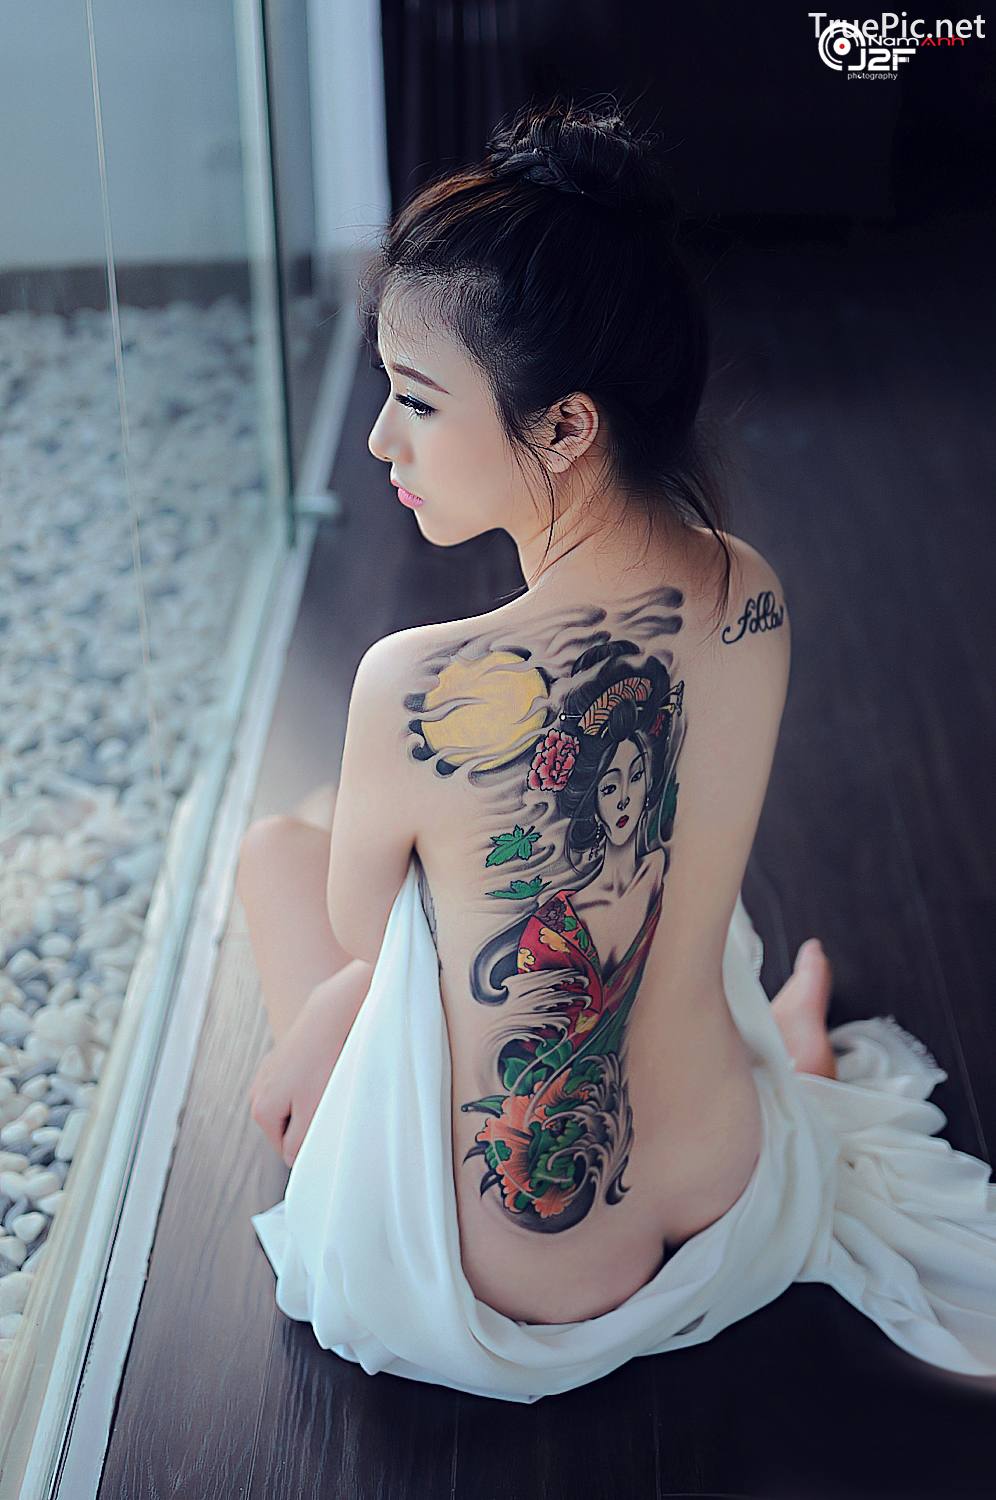 Image-Vietnamese-Model-Sexy-Beauty-of-Beautiful-Girls-Taken-by-NamAnh-Photography-2-TruePic.net- Picture-38